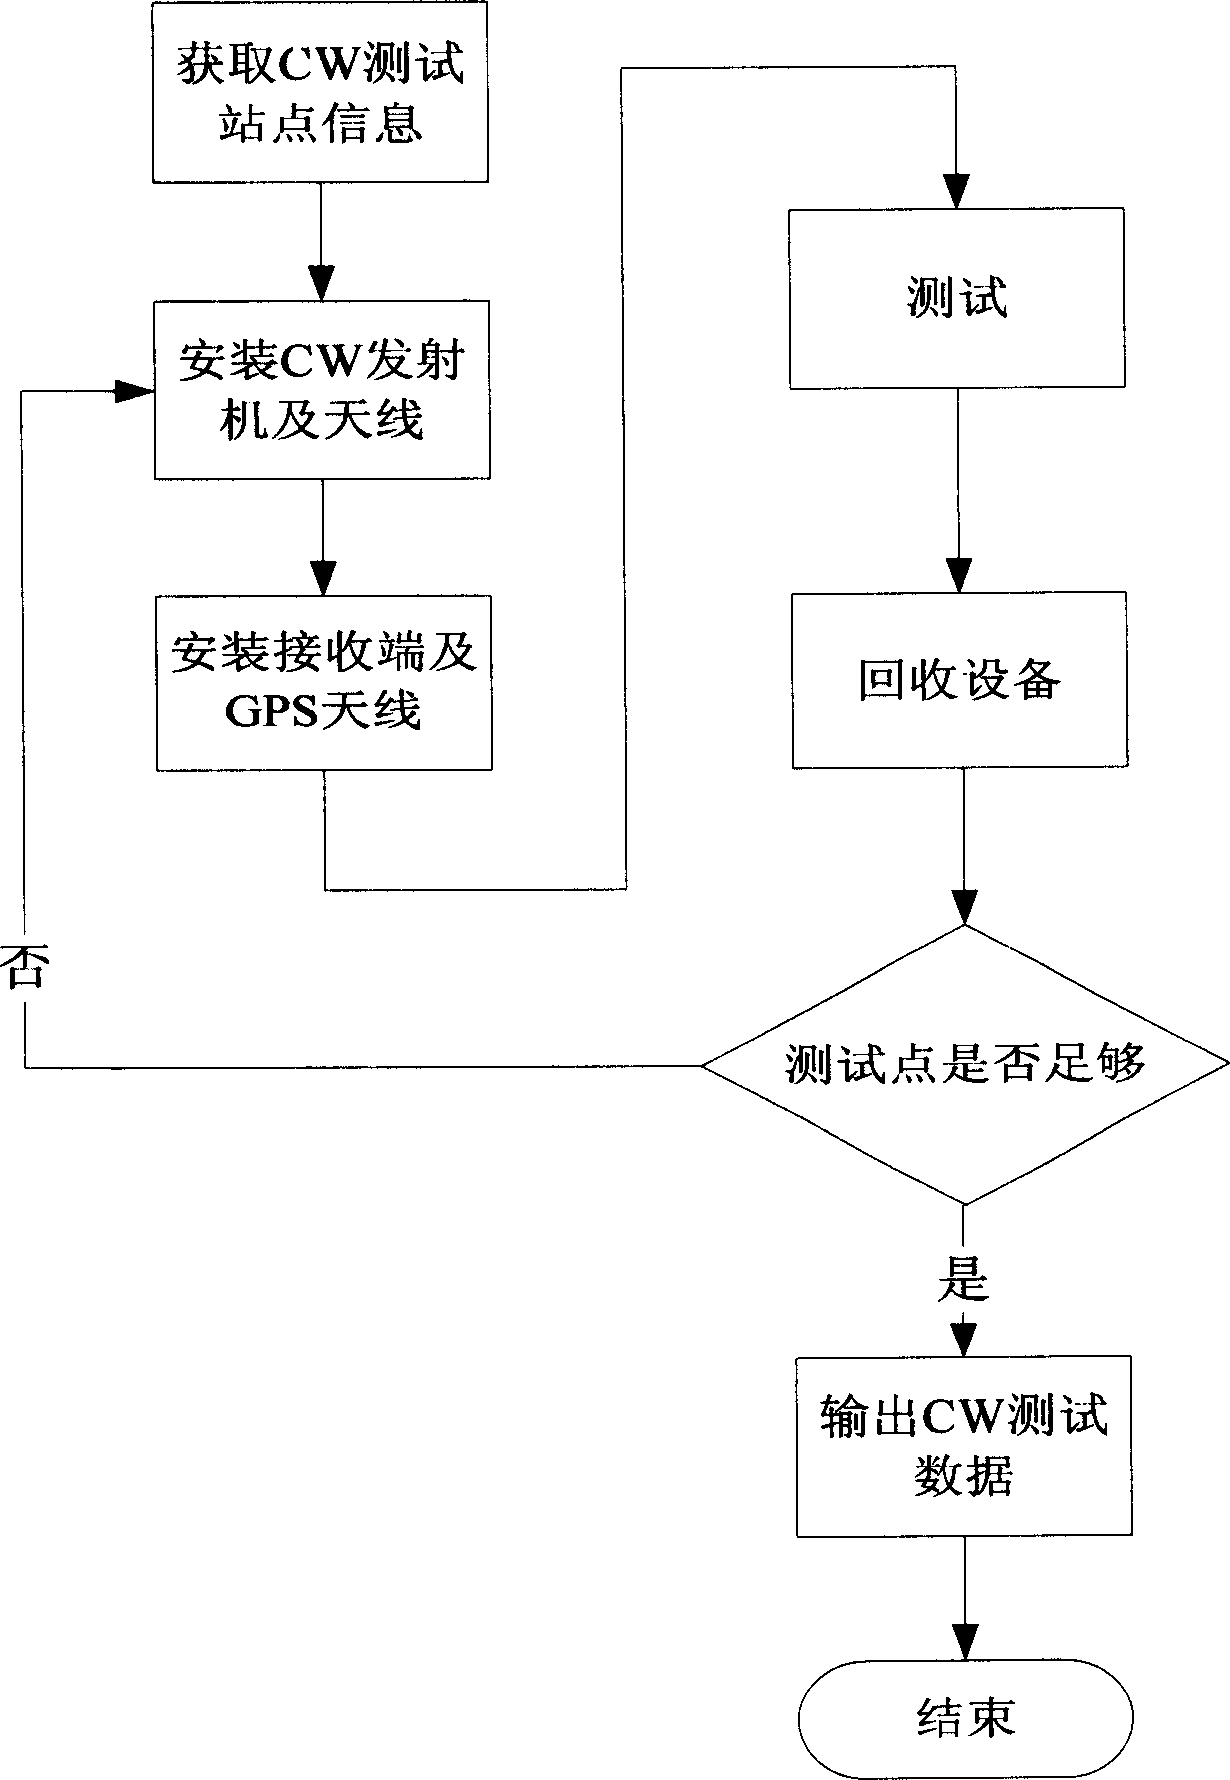 Method and system for obtaining and correcting wireless propagation model parameter